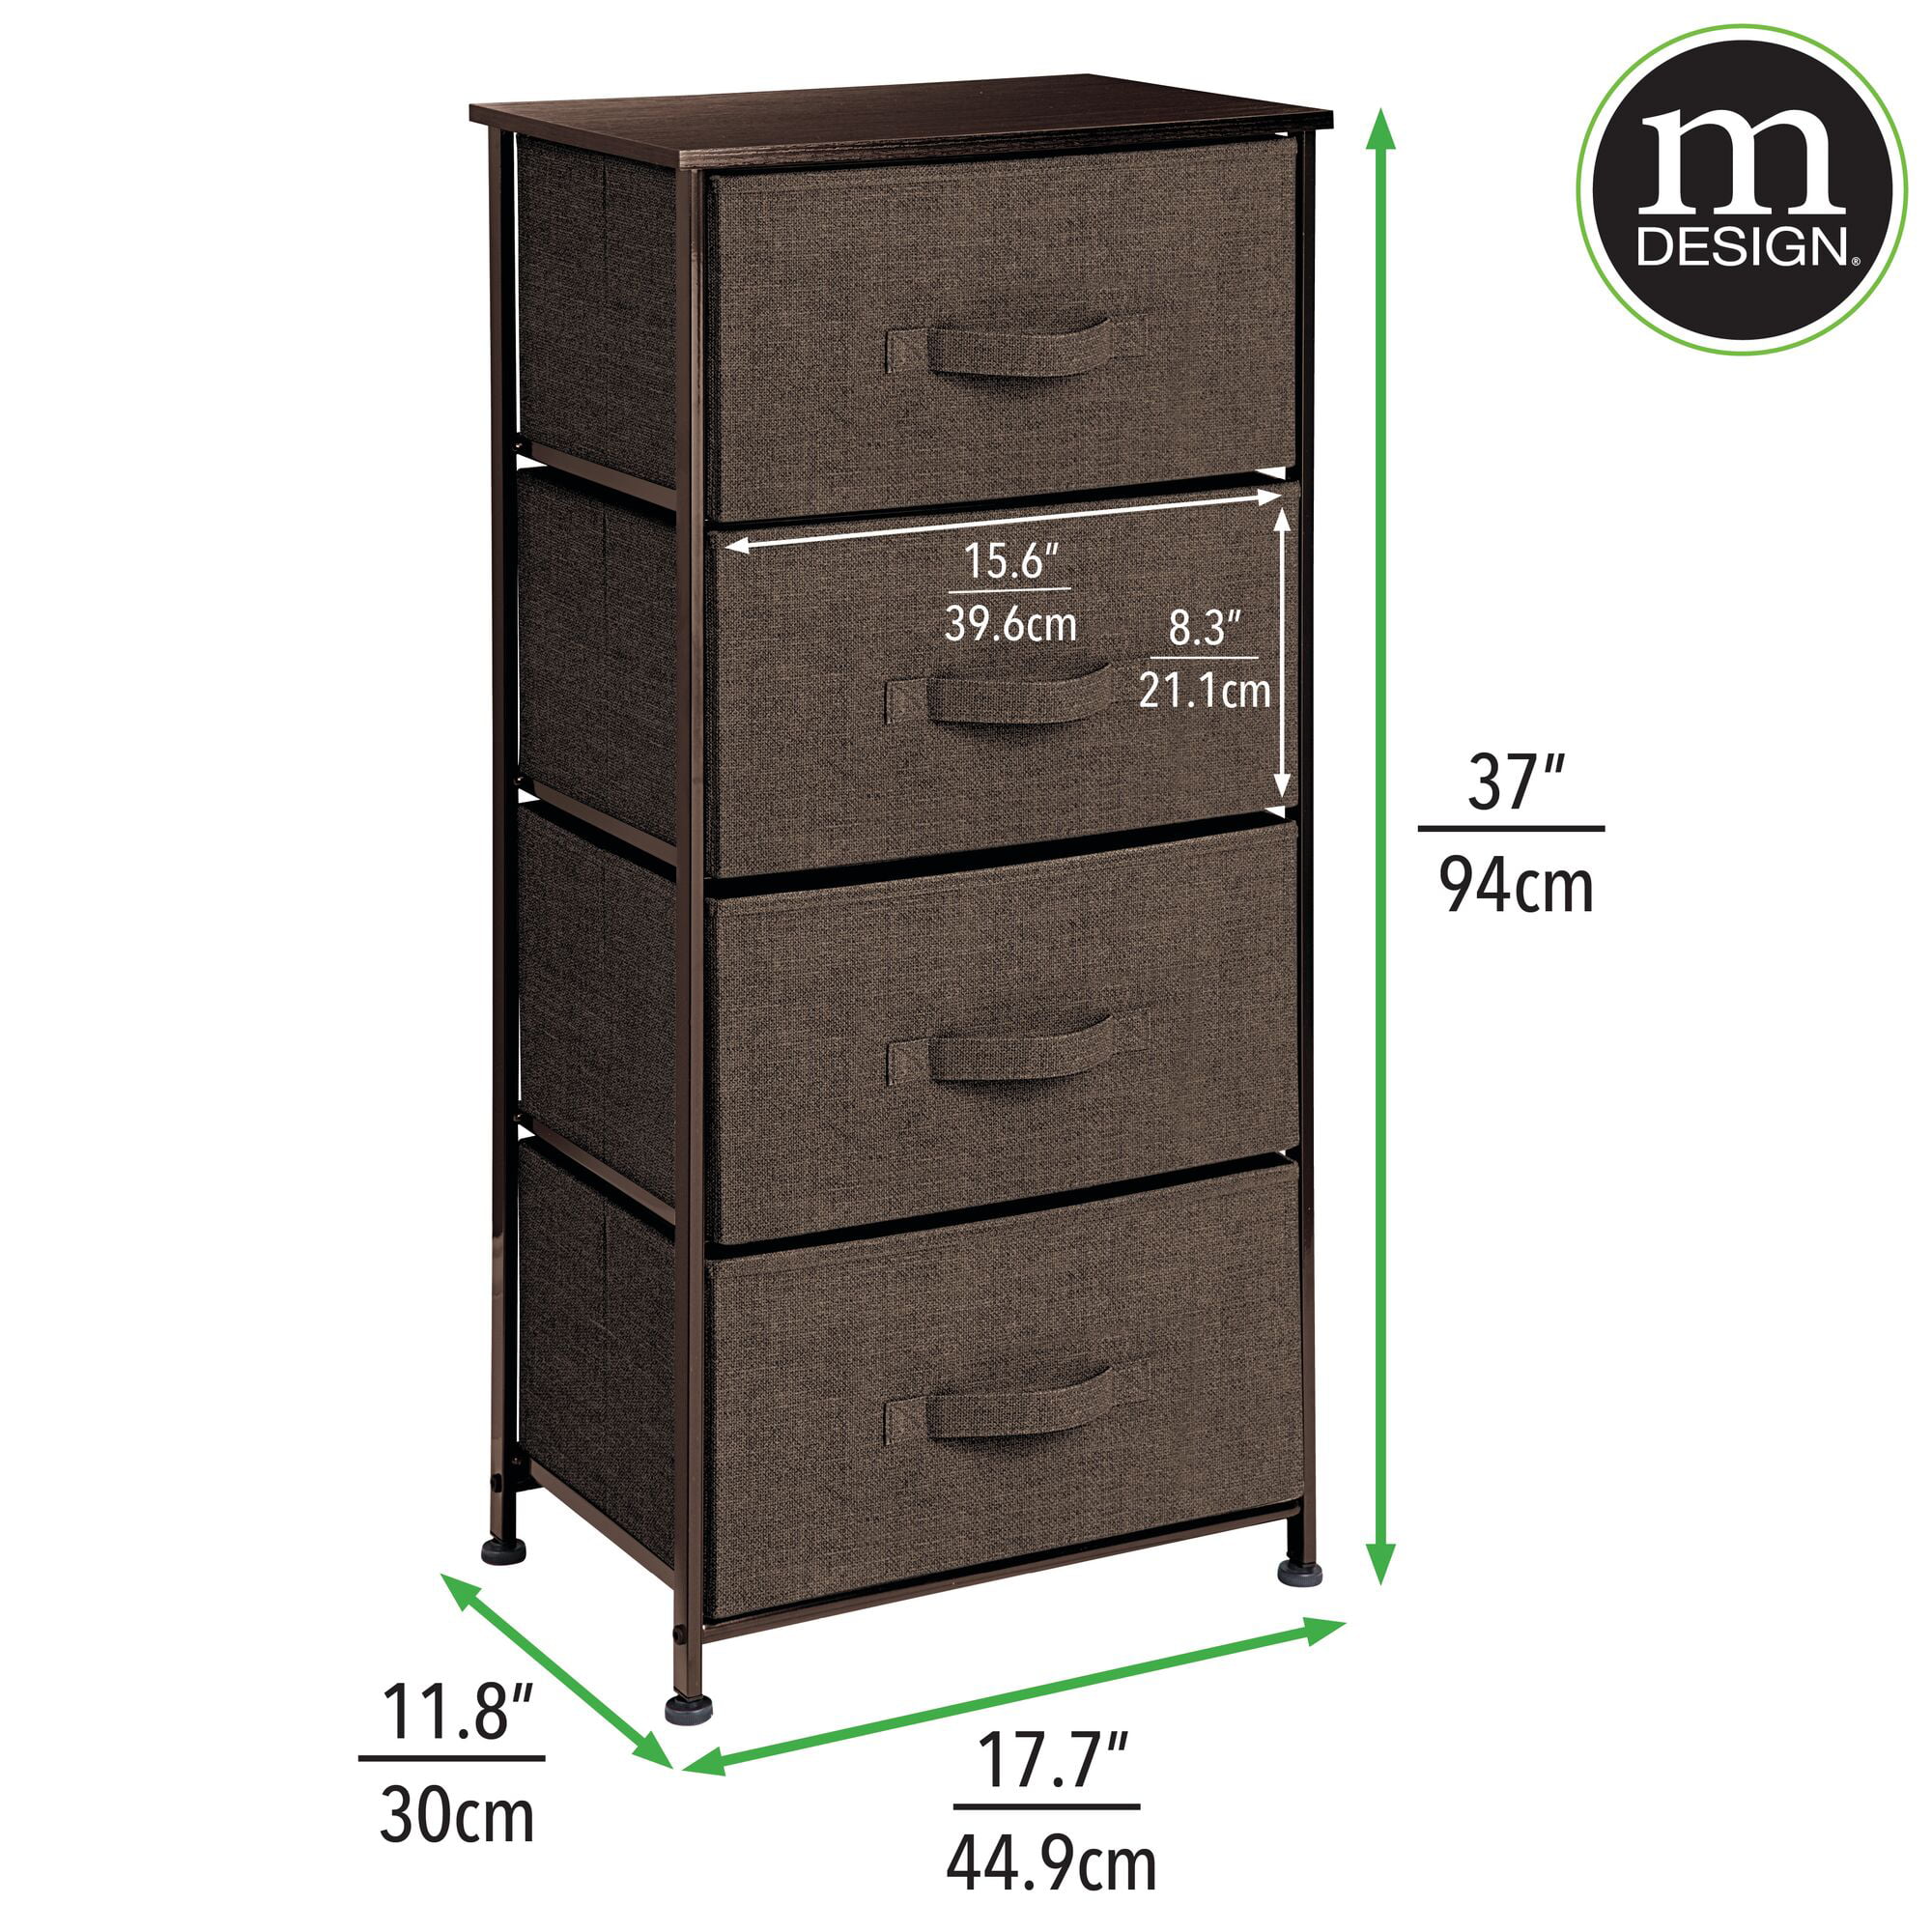 mDesign Tall Dresser Storage Tower Stand, 4 Removable Fabric Drawers -  Linen/Tan 